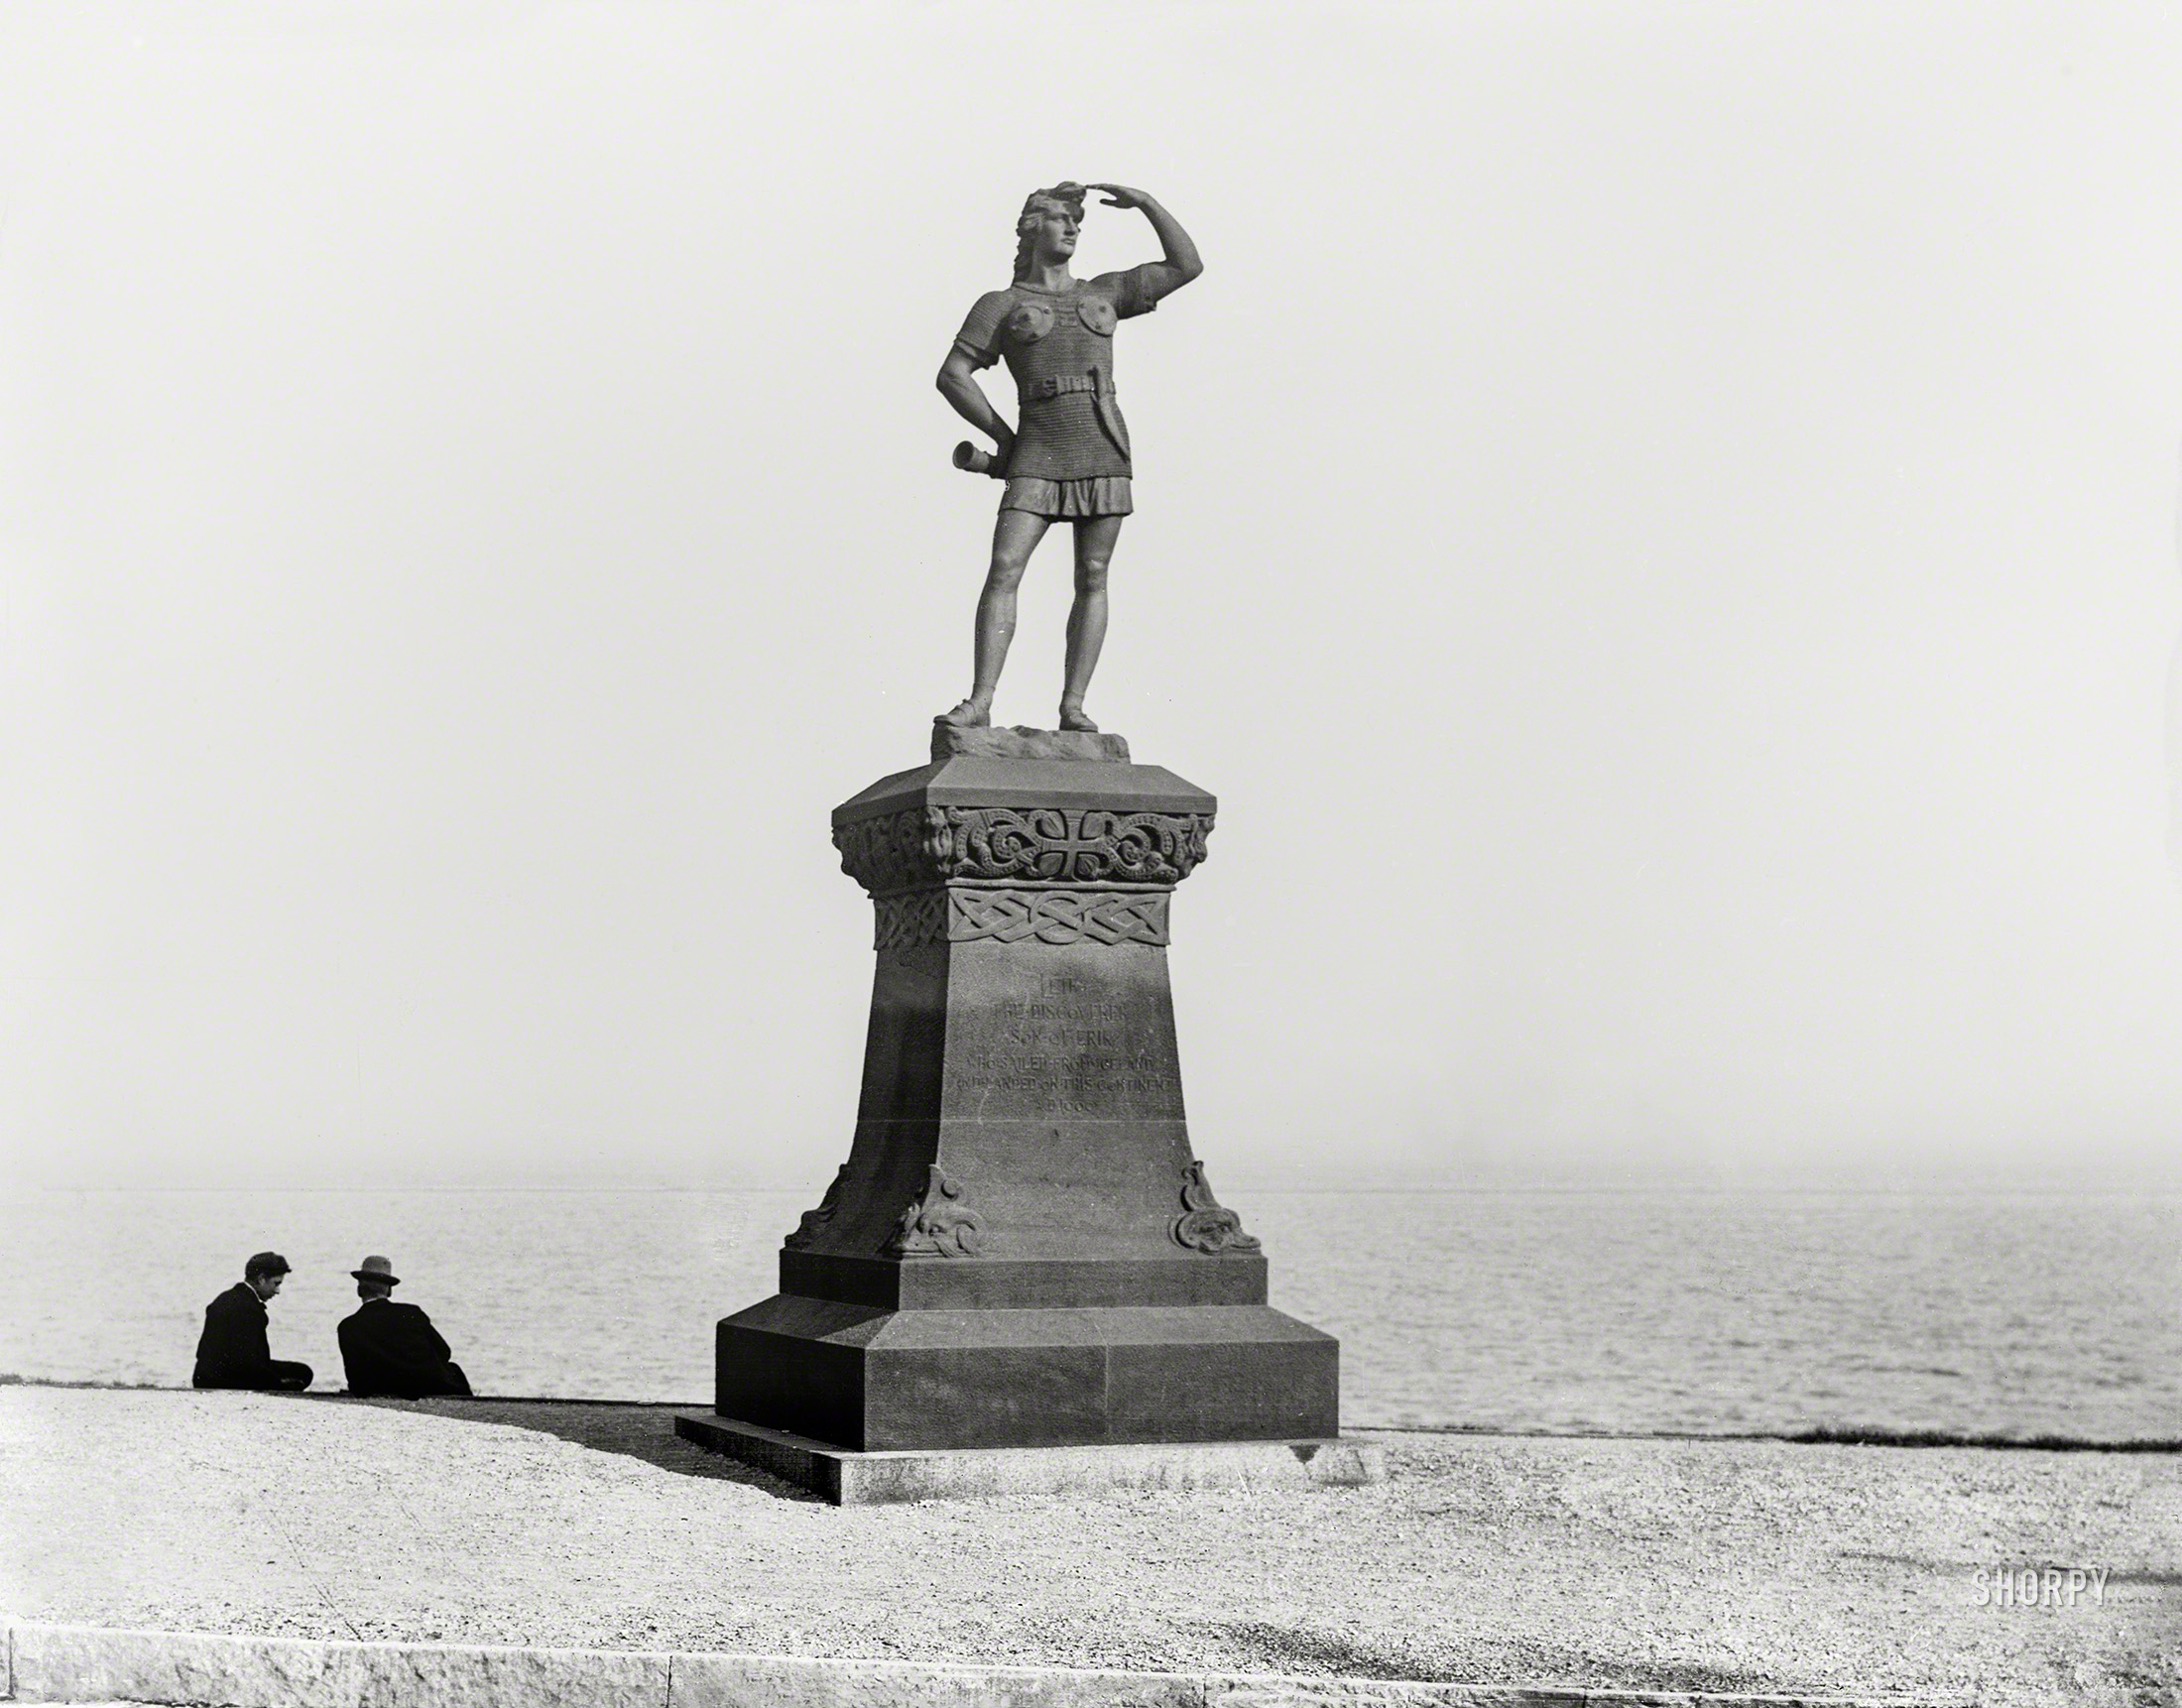 LEIF THE DISCOVERER
SON OF ERIK
WHO SAILED FROM ICELAND
AND LANDED ON THIS CONTINENT
A.D. 1000
The shores of Lake Michigan circa 1899. "Leif Erikson statue, Milwaukee, Wisconsin." 8x10 inch dry plate glass negative. View full size.